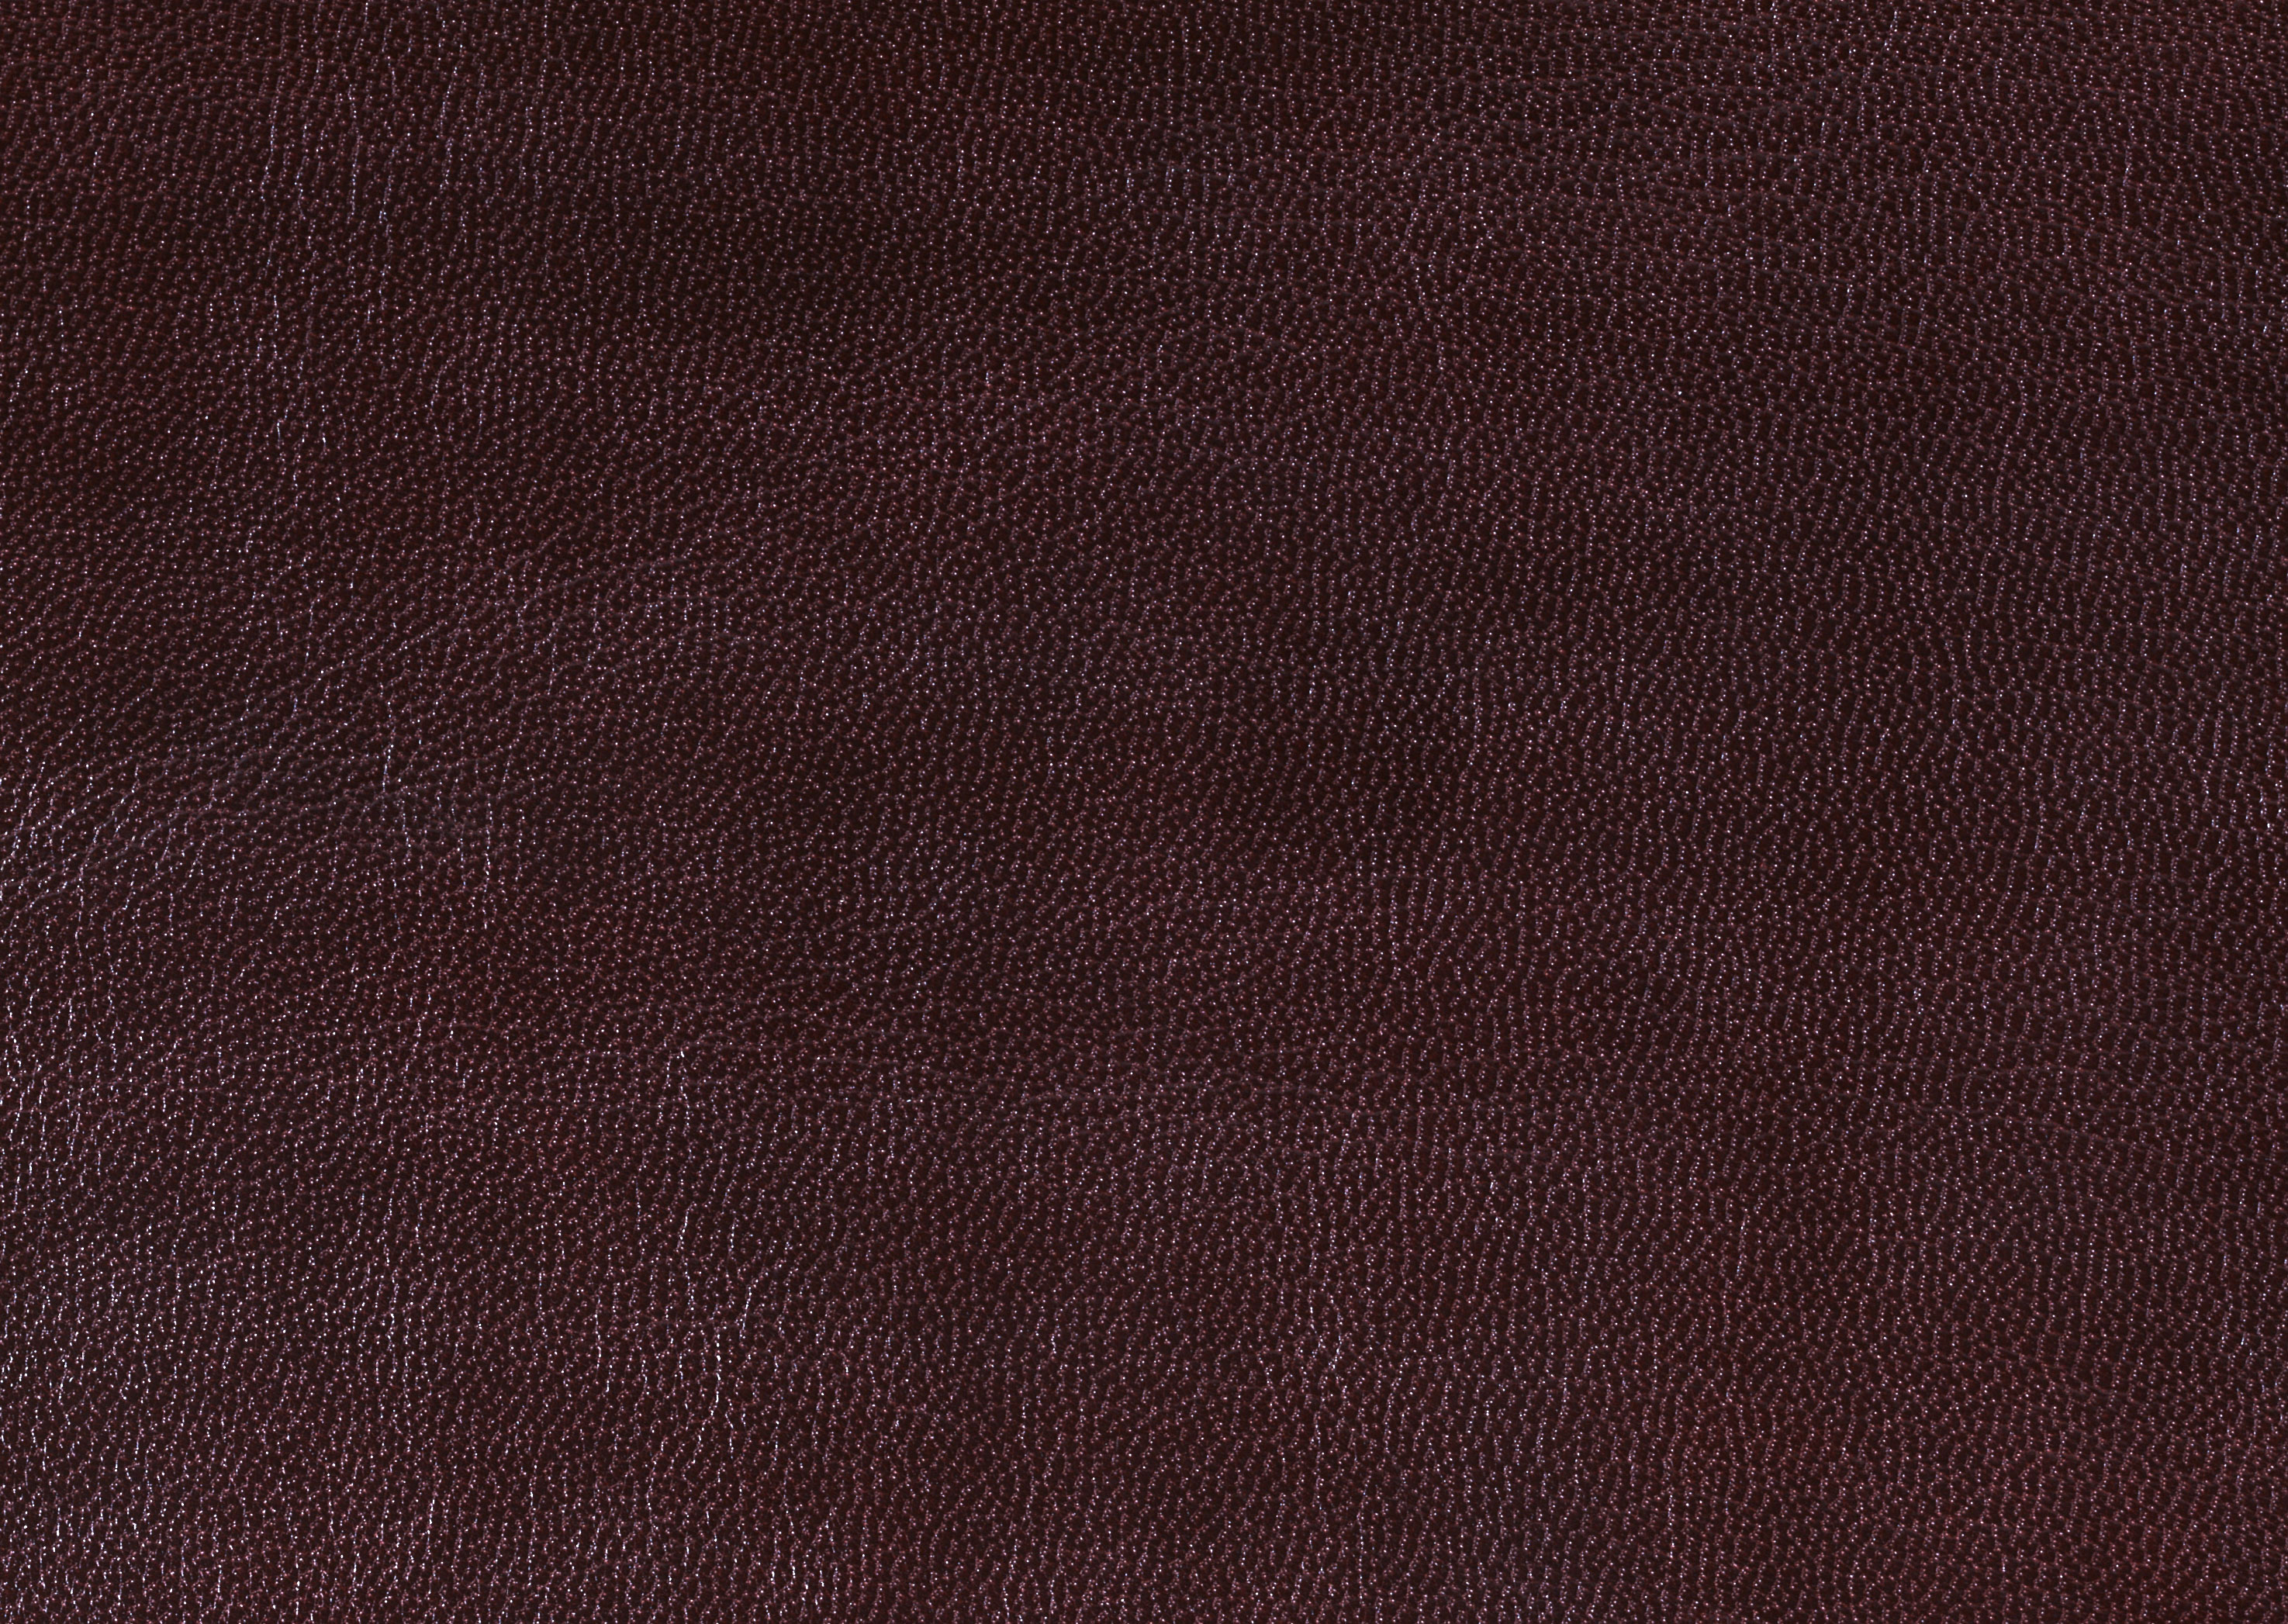 Brown leather texture background image free download